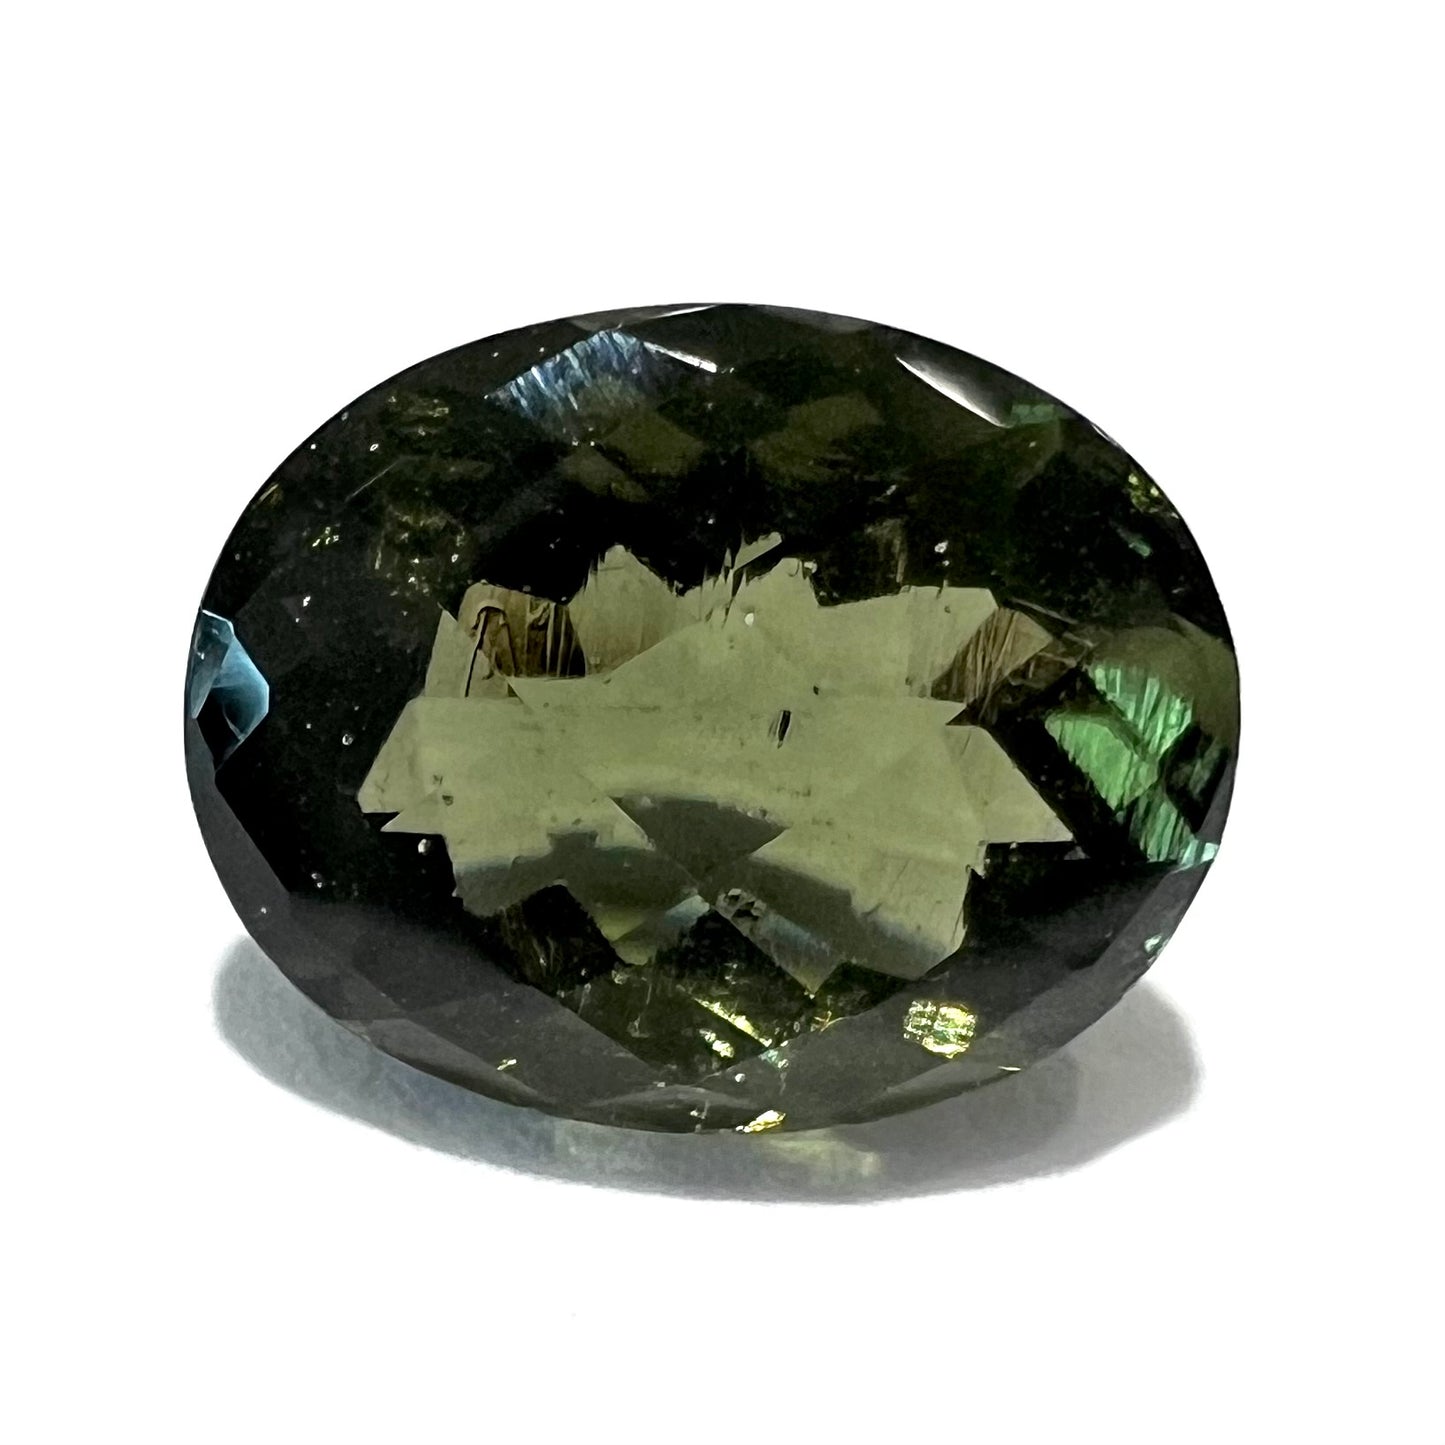 A natural, oval checkerboard cut moldavite gemstone that weighs 2.39 carats.